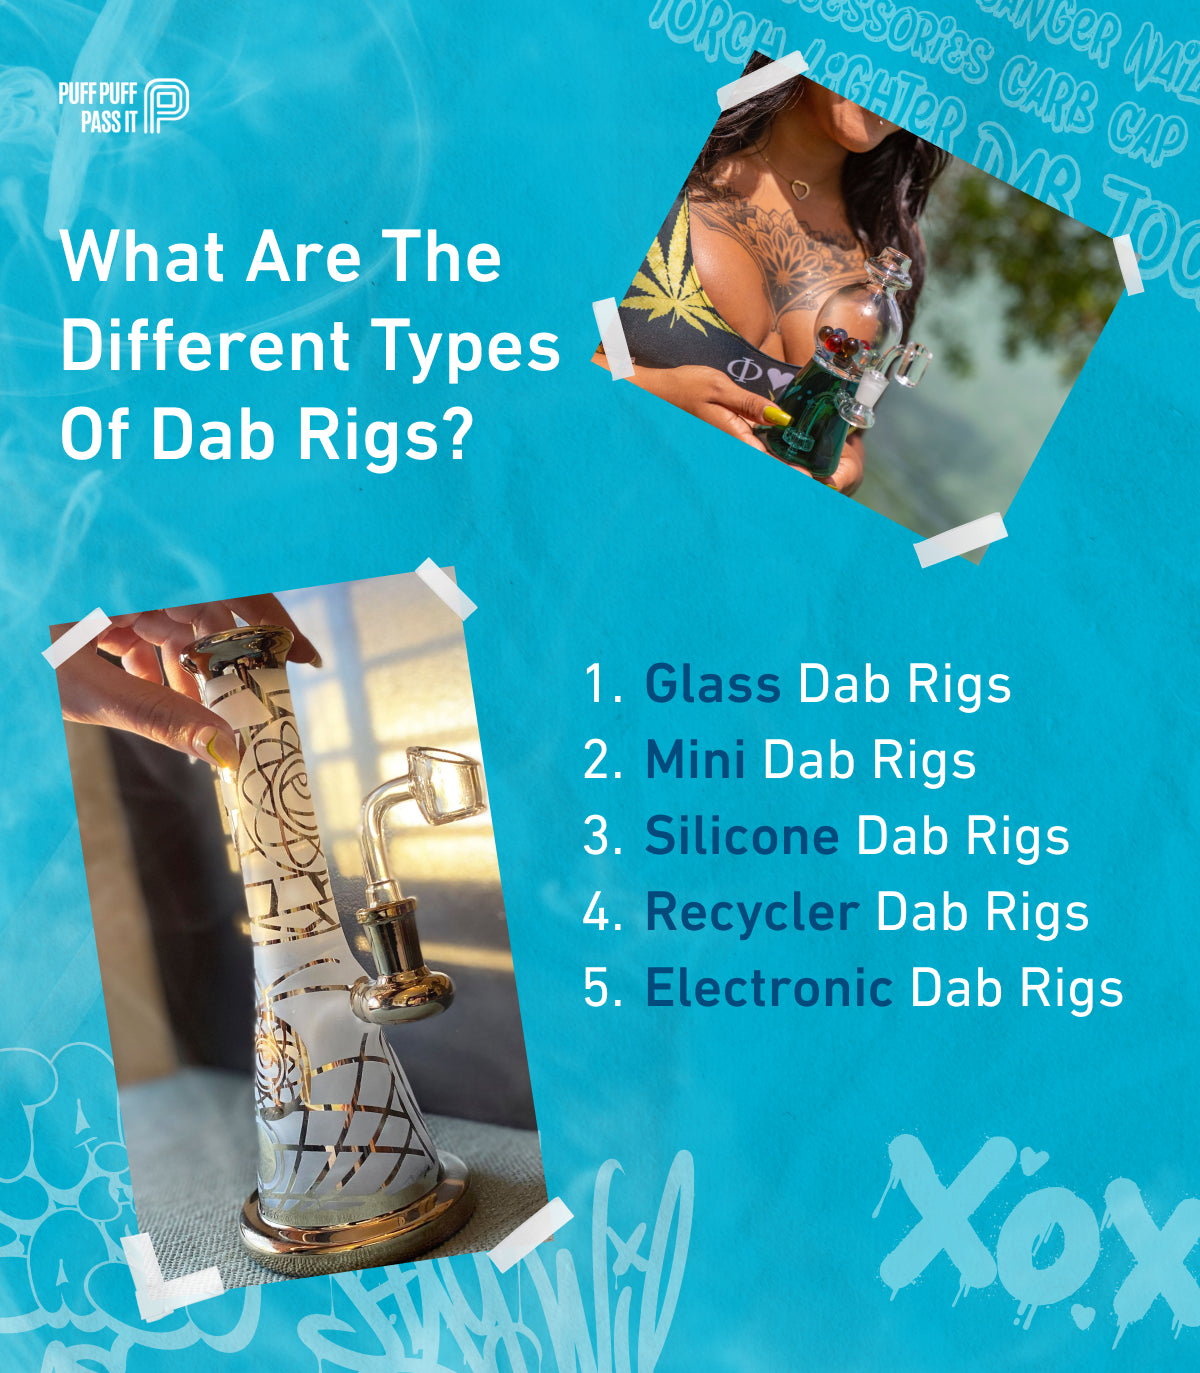 What are the different types of dab rigs?